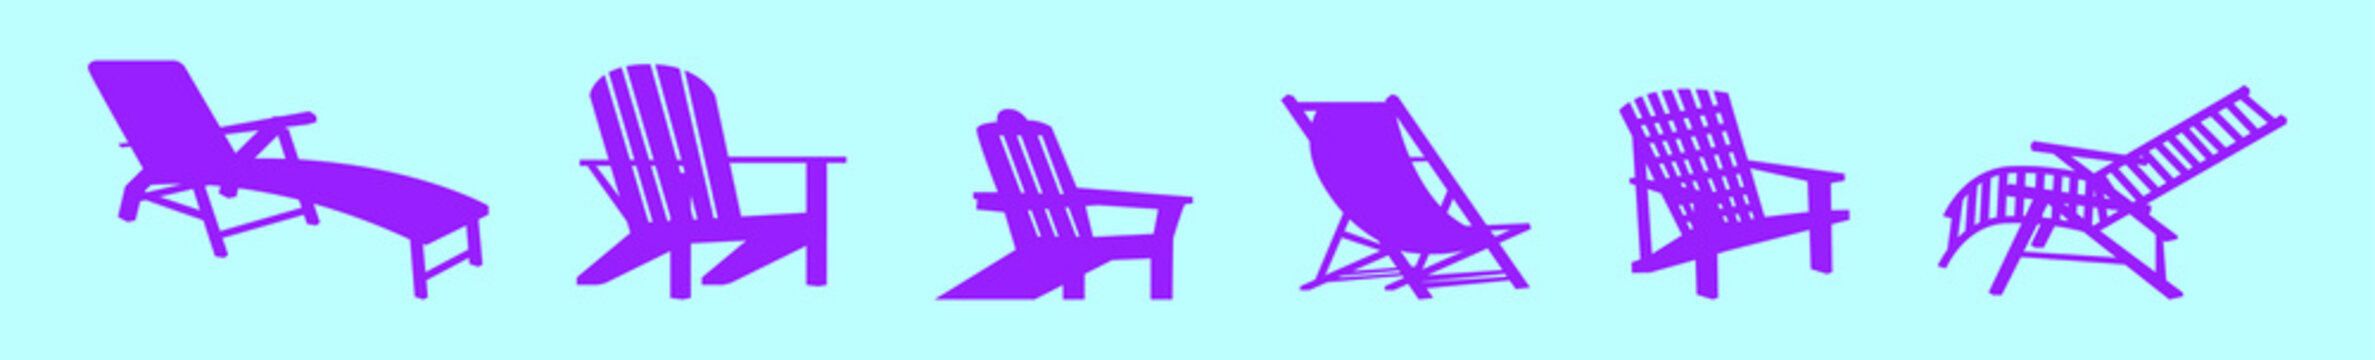 set of lawn chair cartoon icon design template with various models vector illustration isolated on blue background